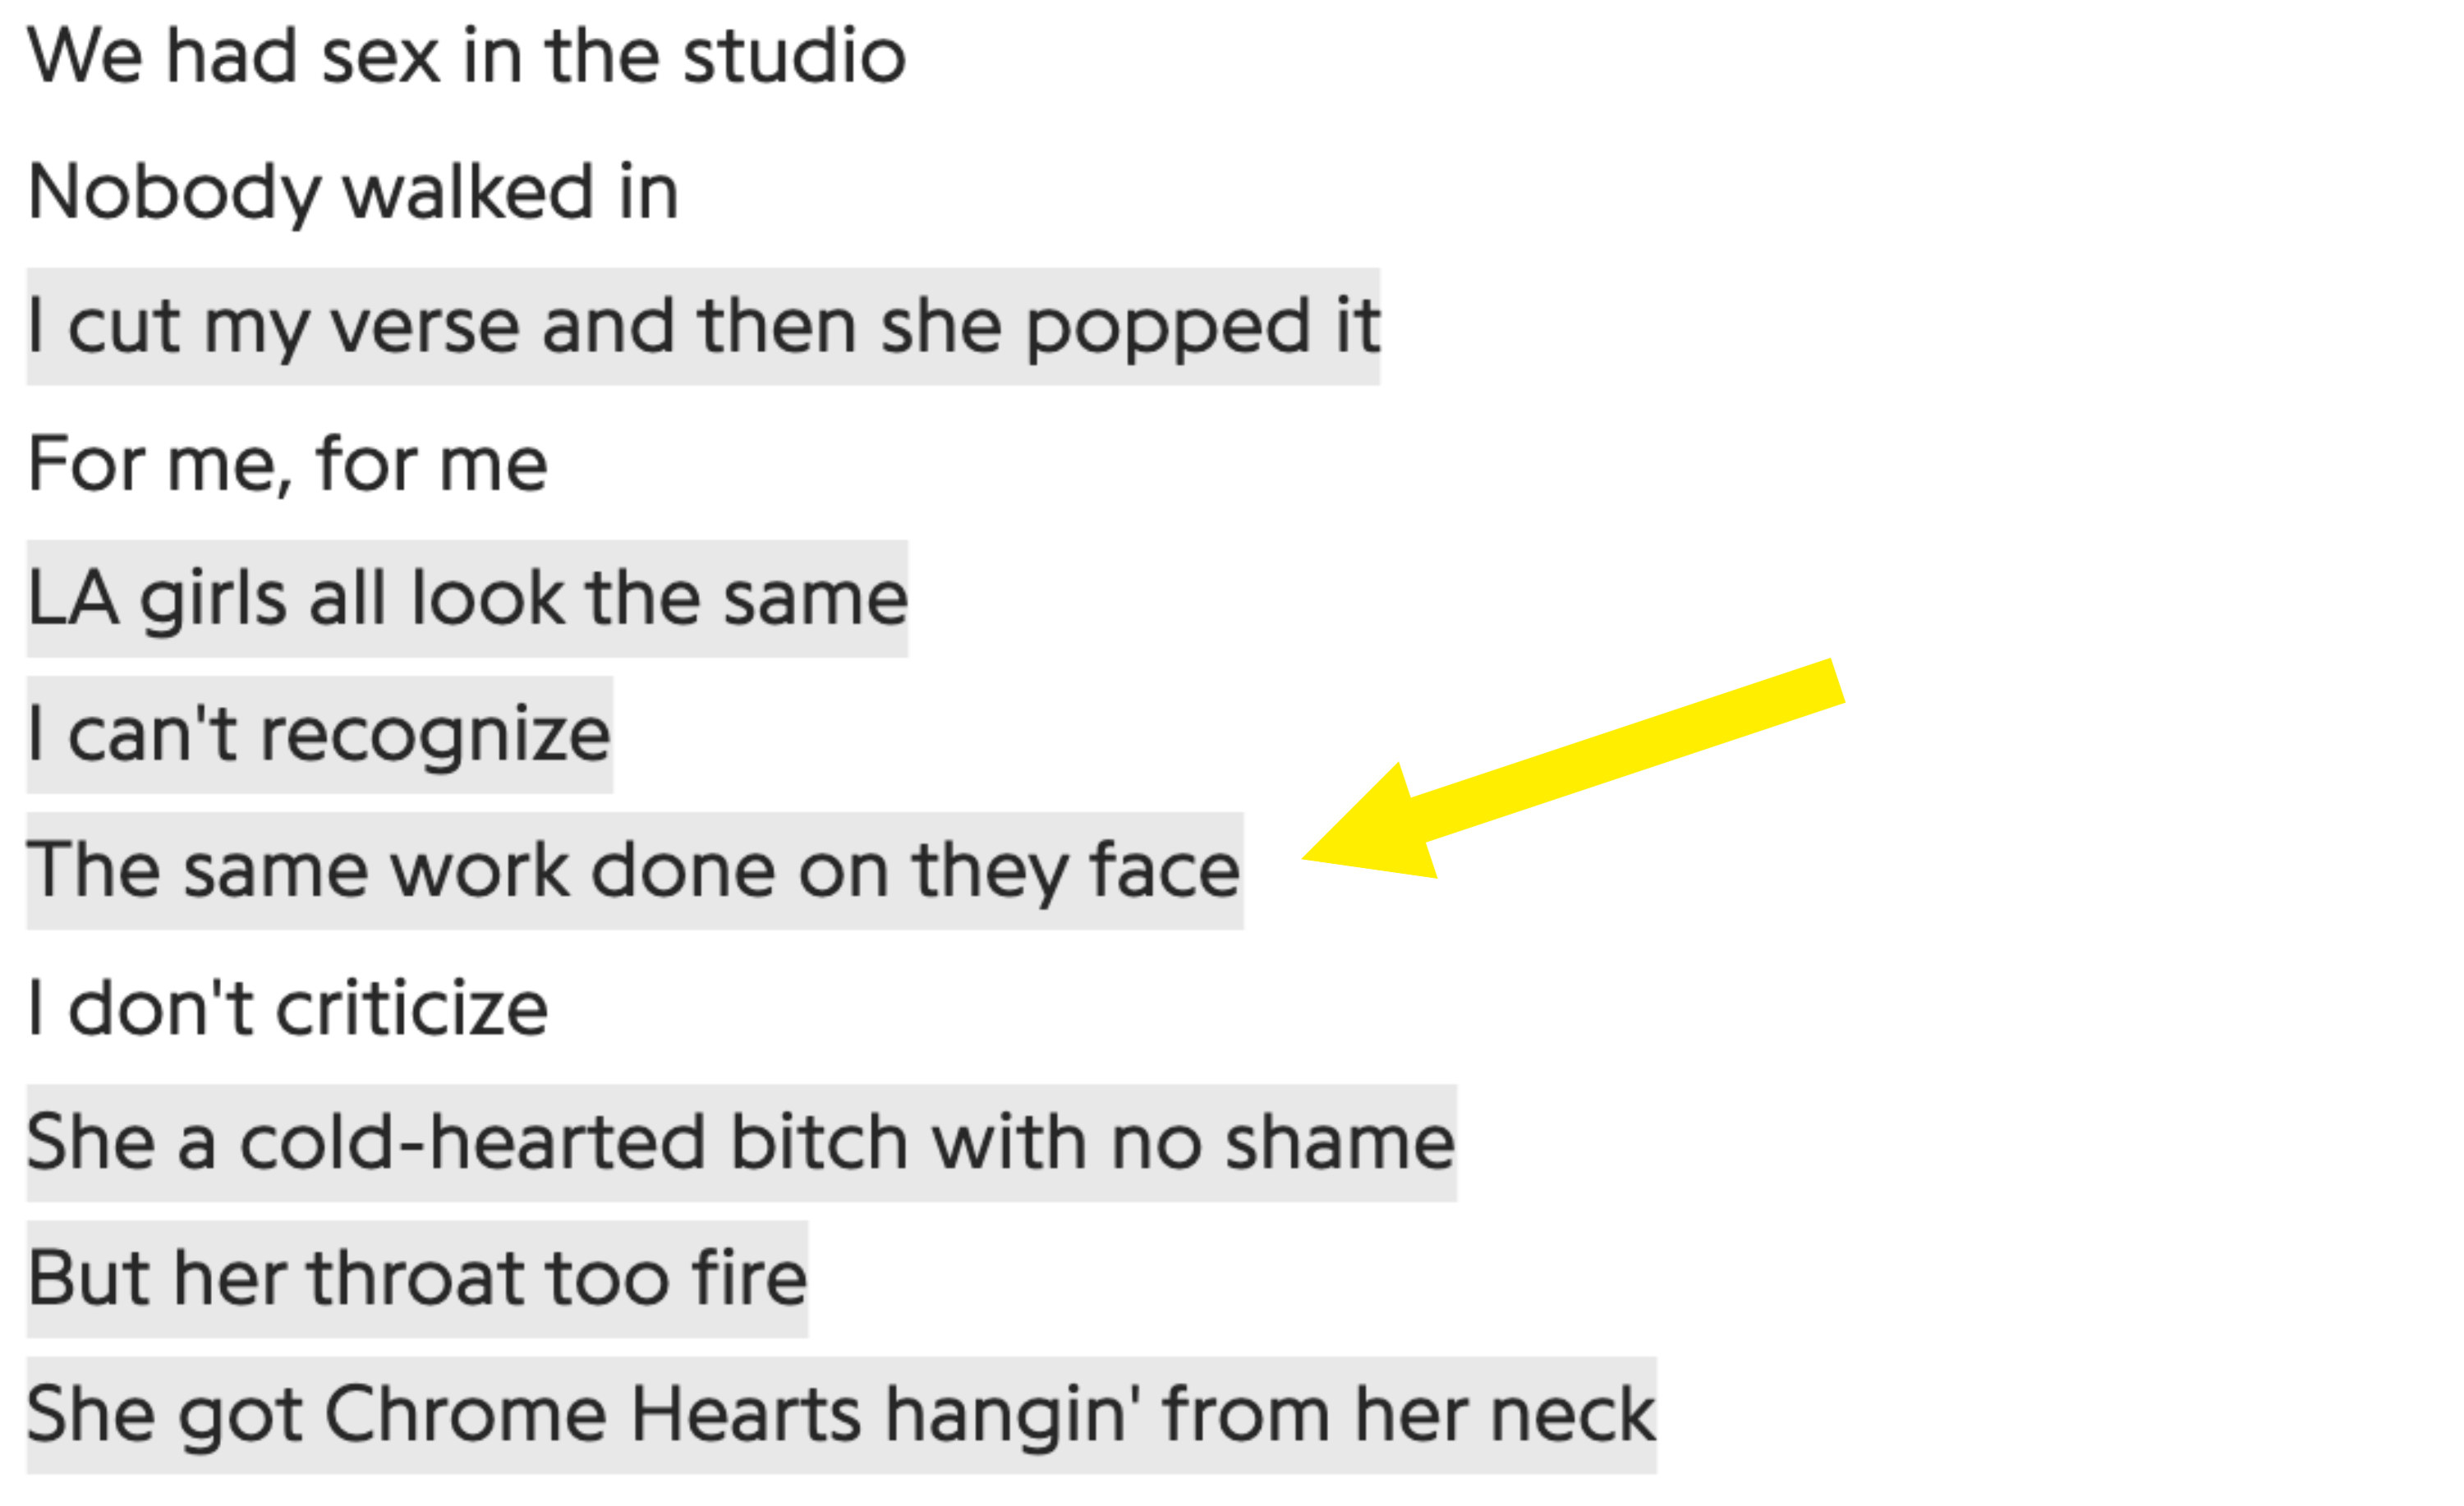 Lyrics which read, &quot;LA girls all look the same / I can&#x27;t recognize / The same work done on they face&quot; and then a reference to &quot;Chrome Hearts hangin&#x27; from her neck&quot;